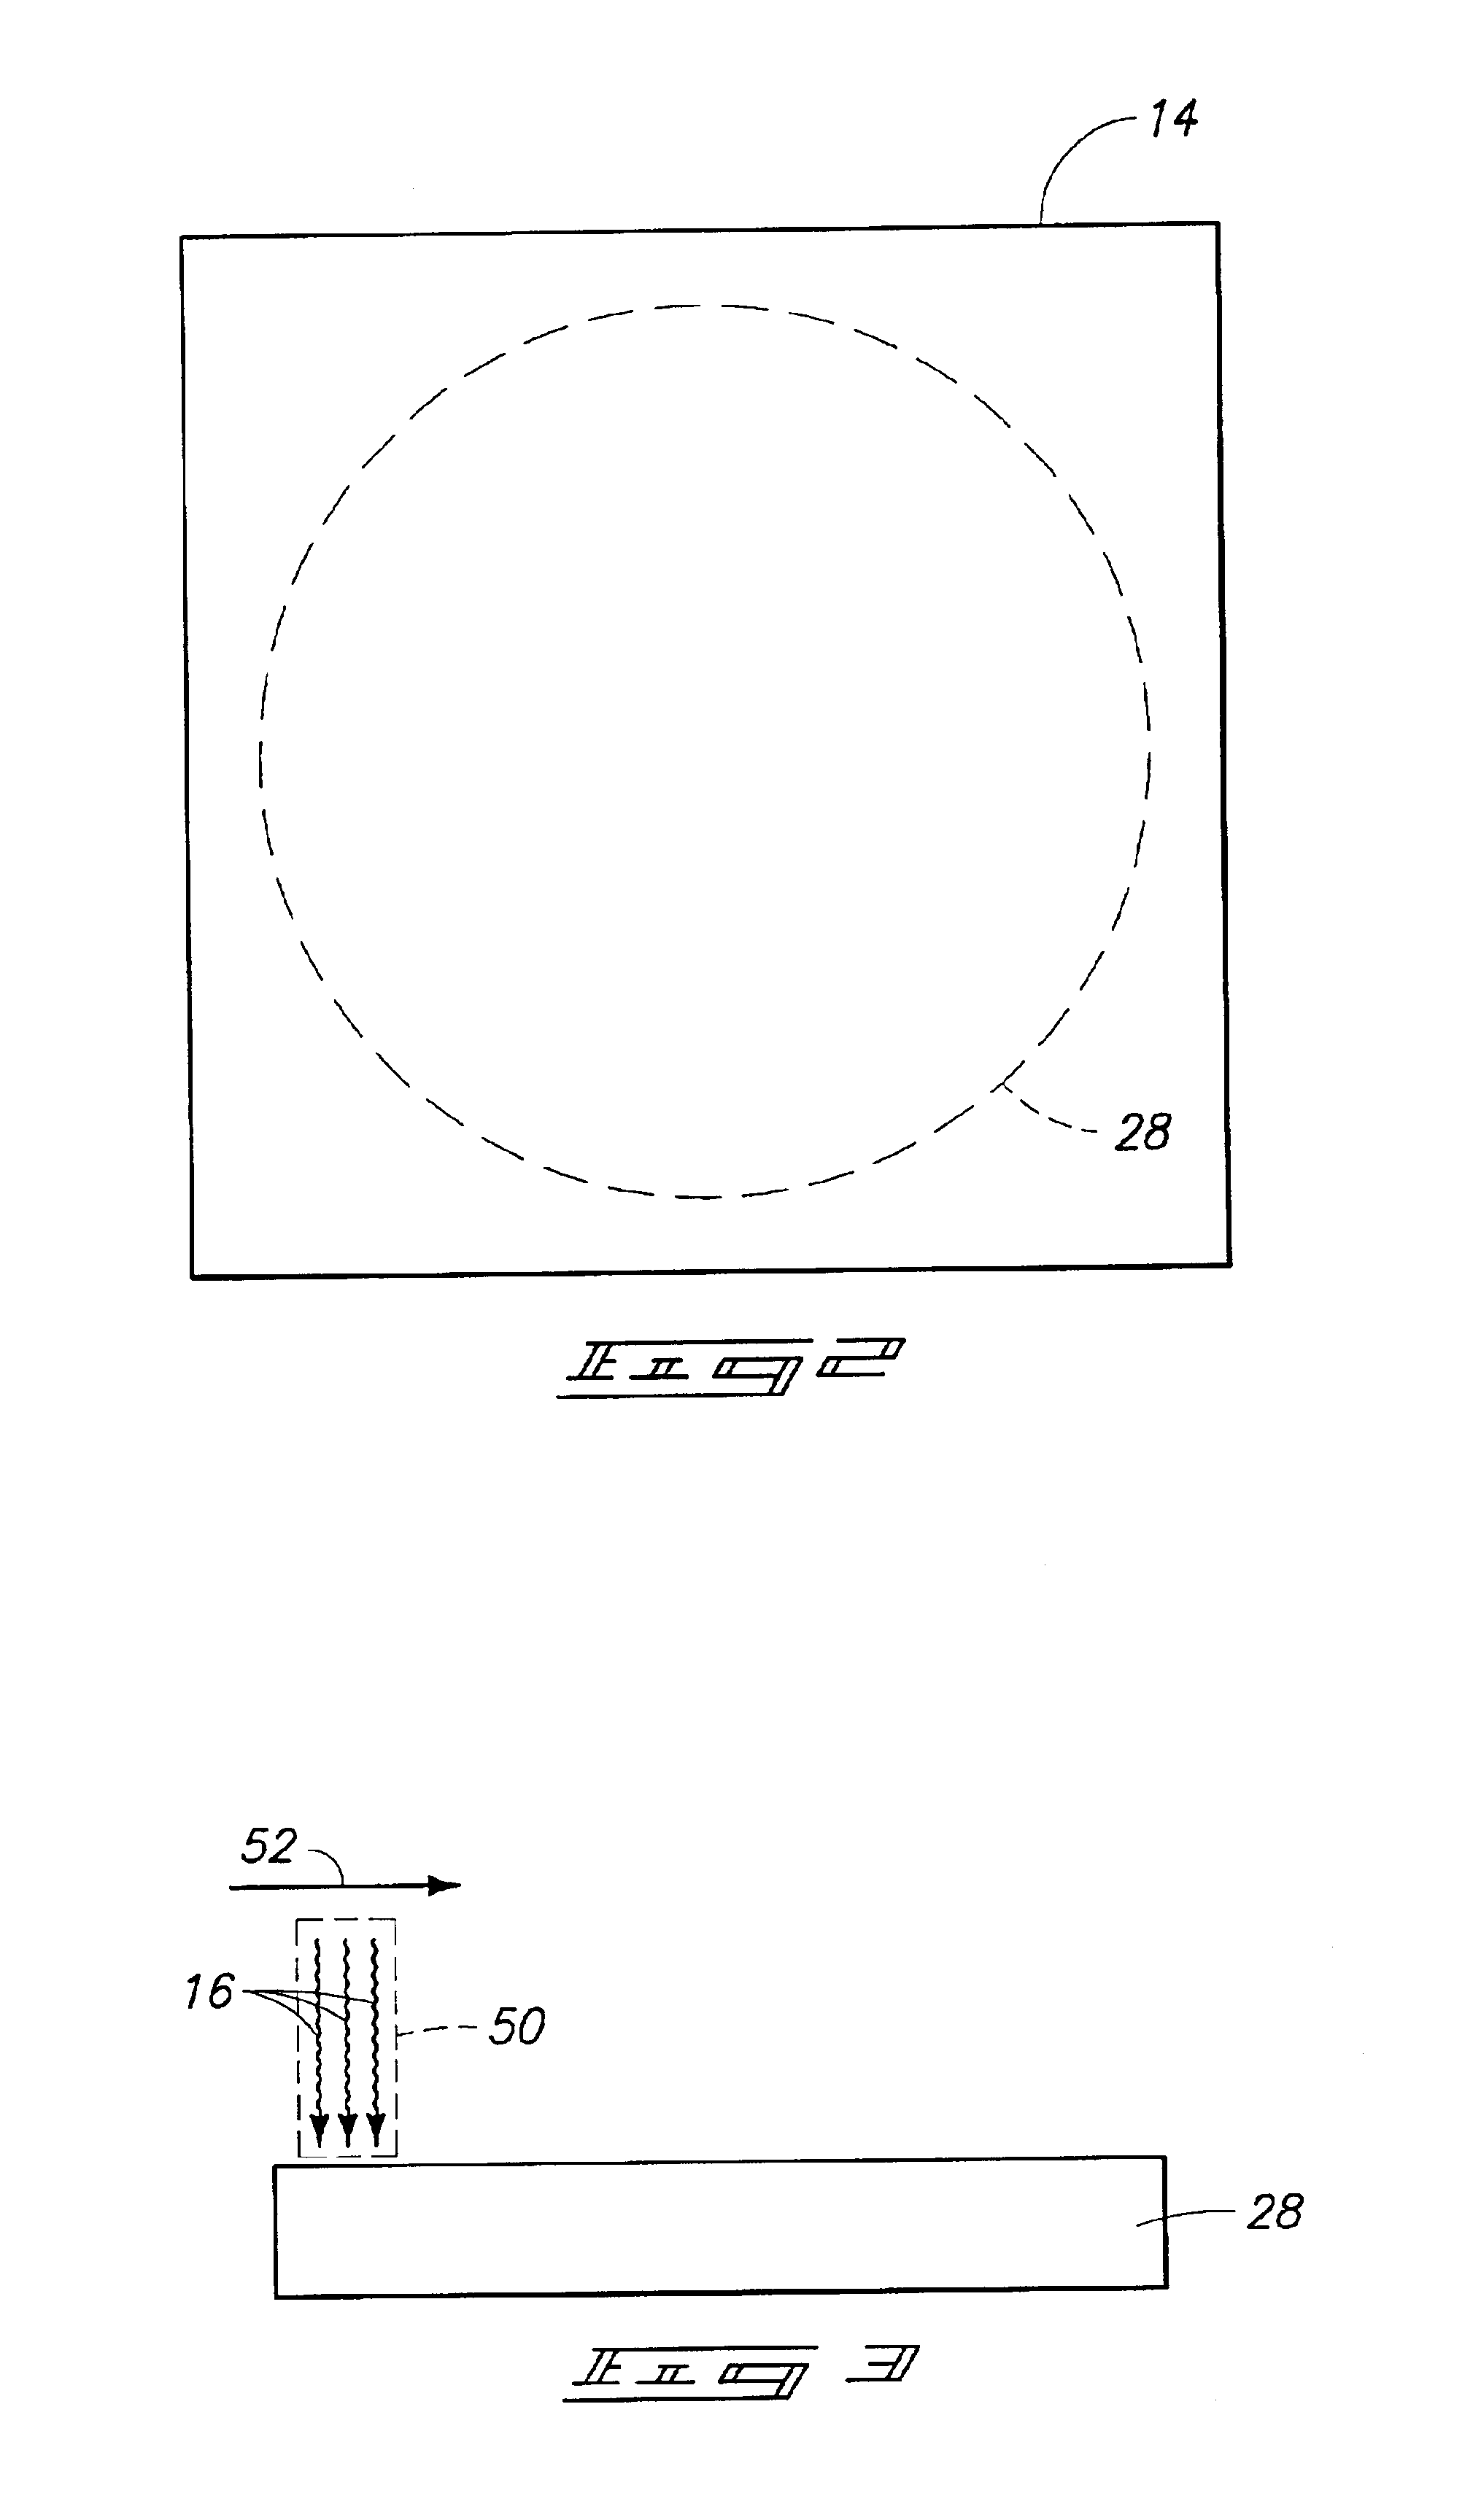 Deposition apparatuses configured for utilizing phased microwave radiation